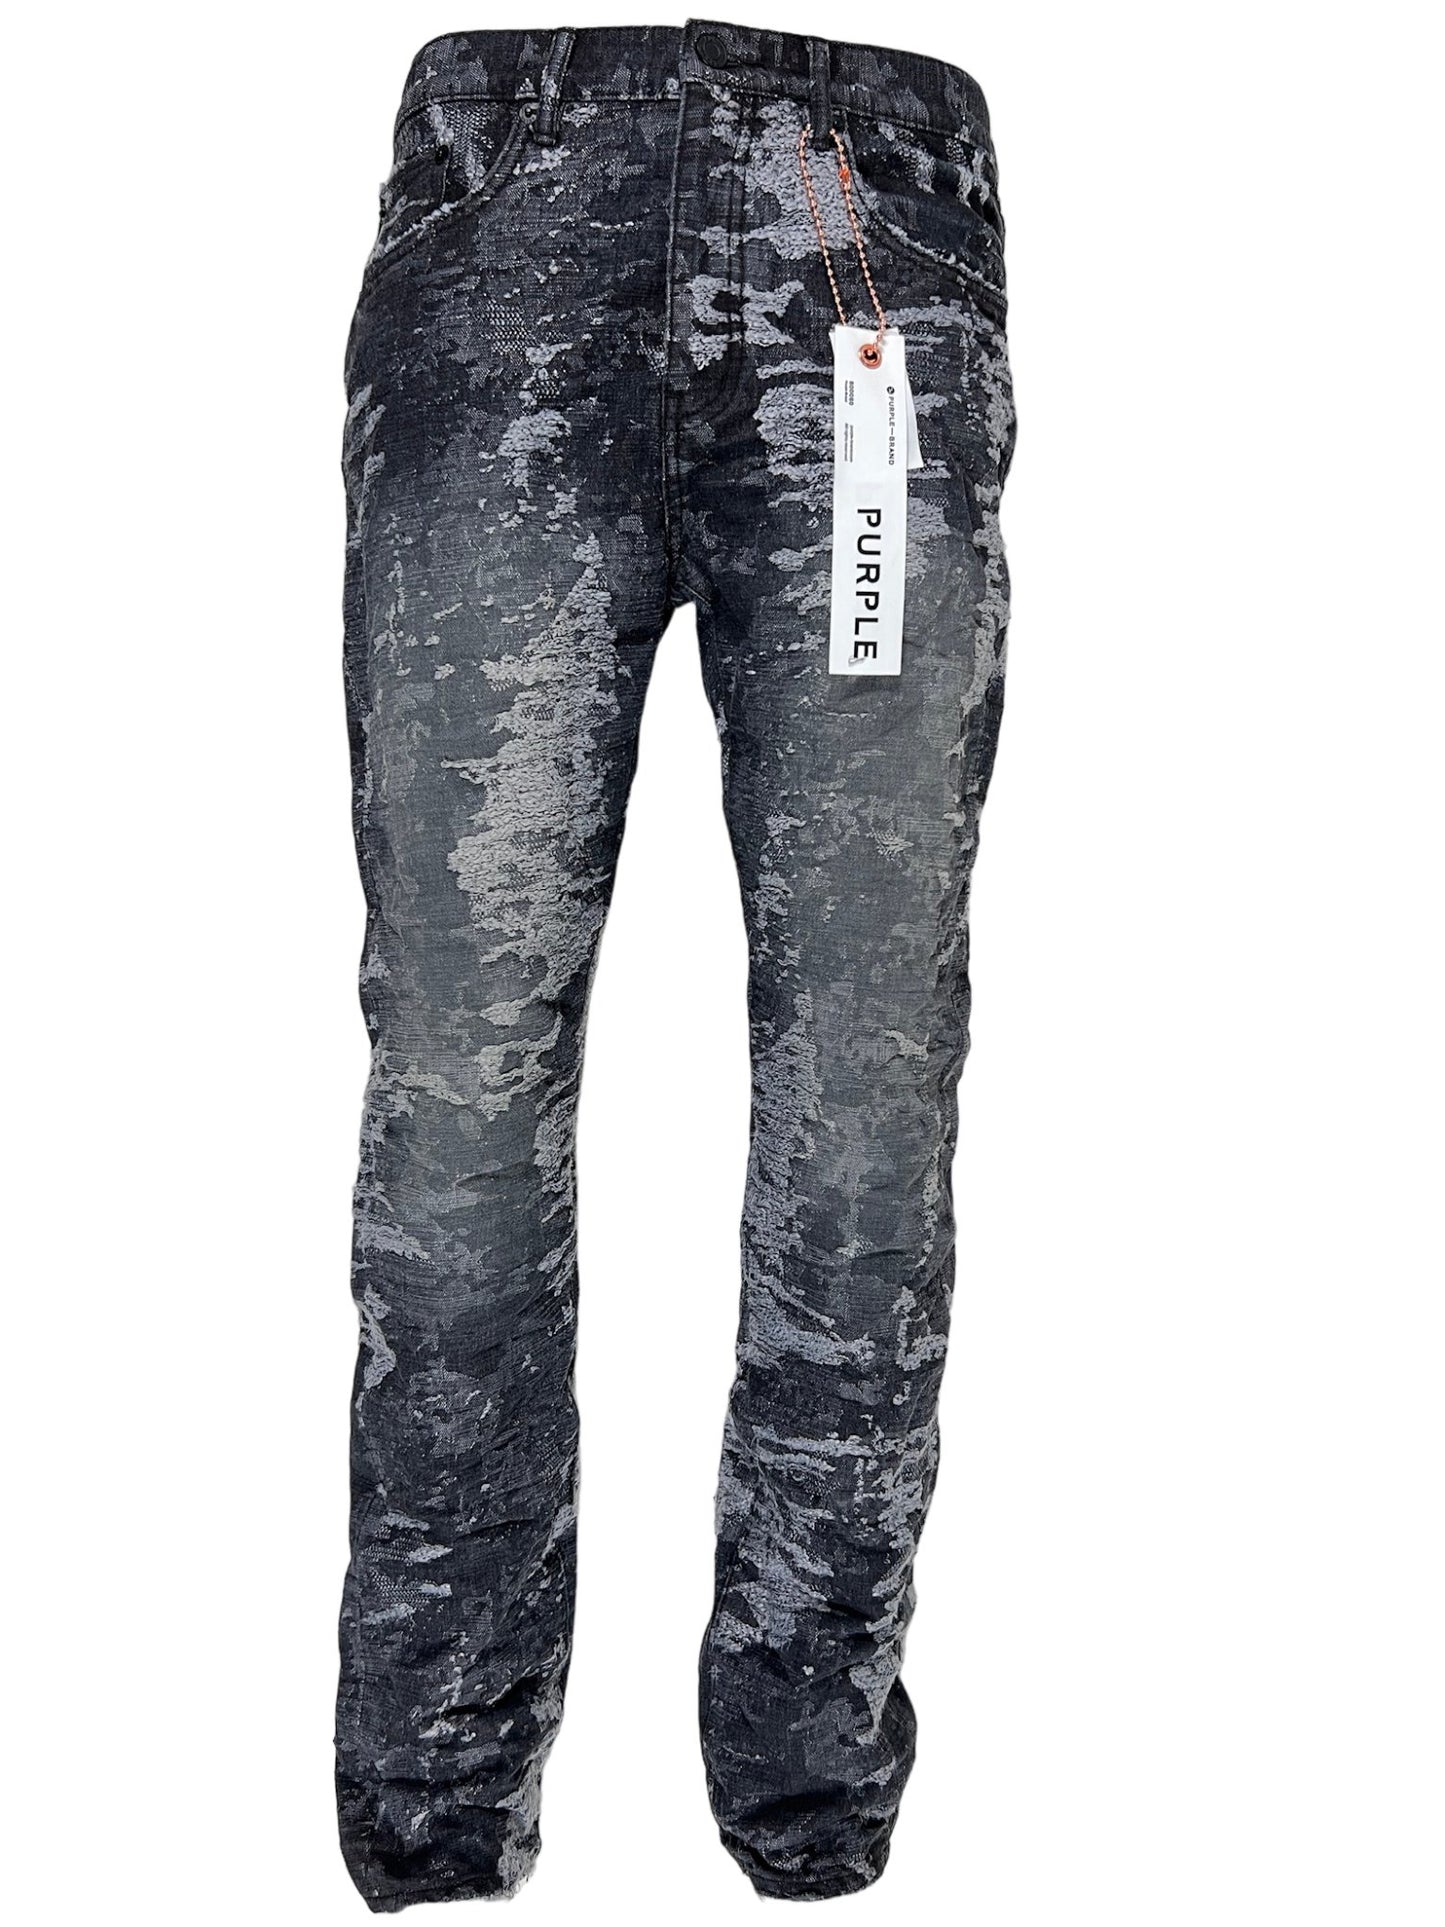 A pair of PURPLE BRAND jeans with a camouflage pattern and reinforced belt loops.